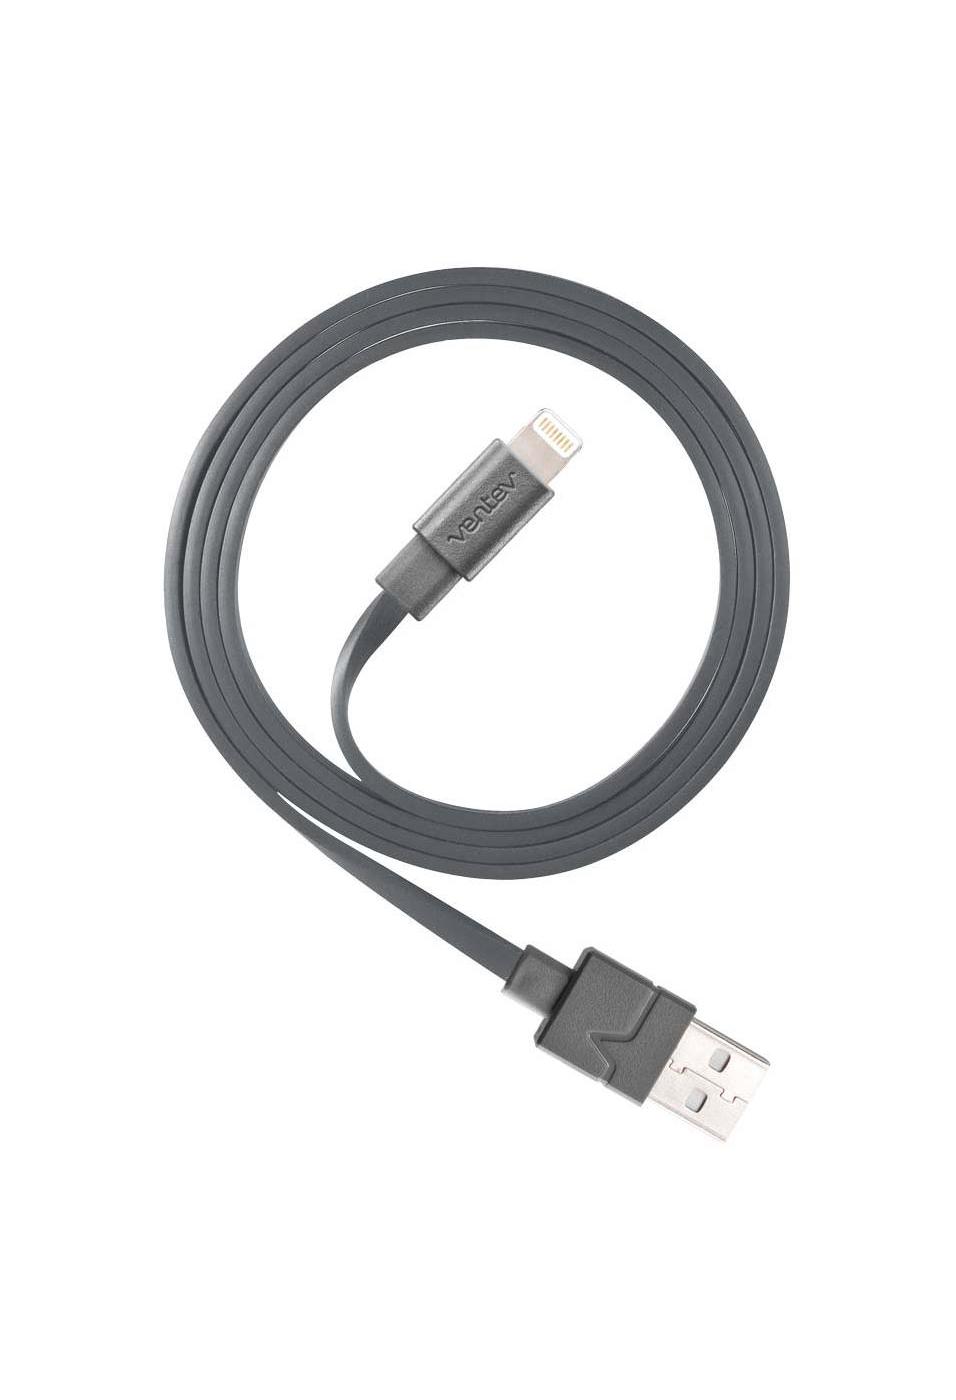 Ventev ChargeSync USB-A to Apple Flat Lightning Cable - Gray; image 3 of 3